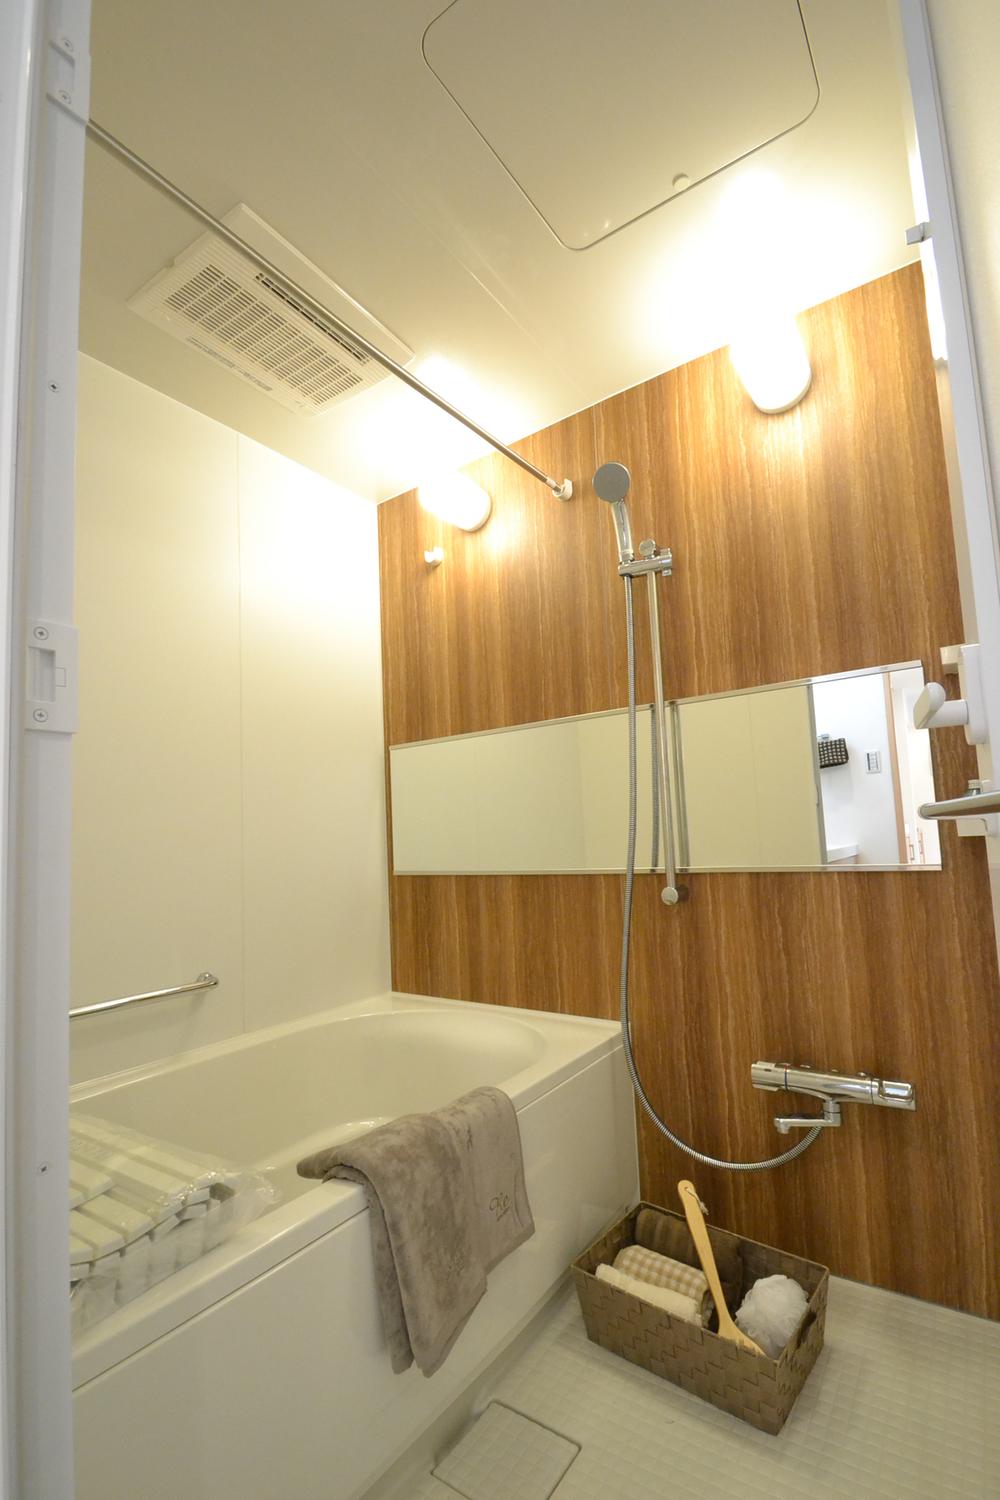 Bathroom. unit bus With bathroom dryer With add cook function